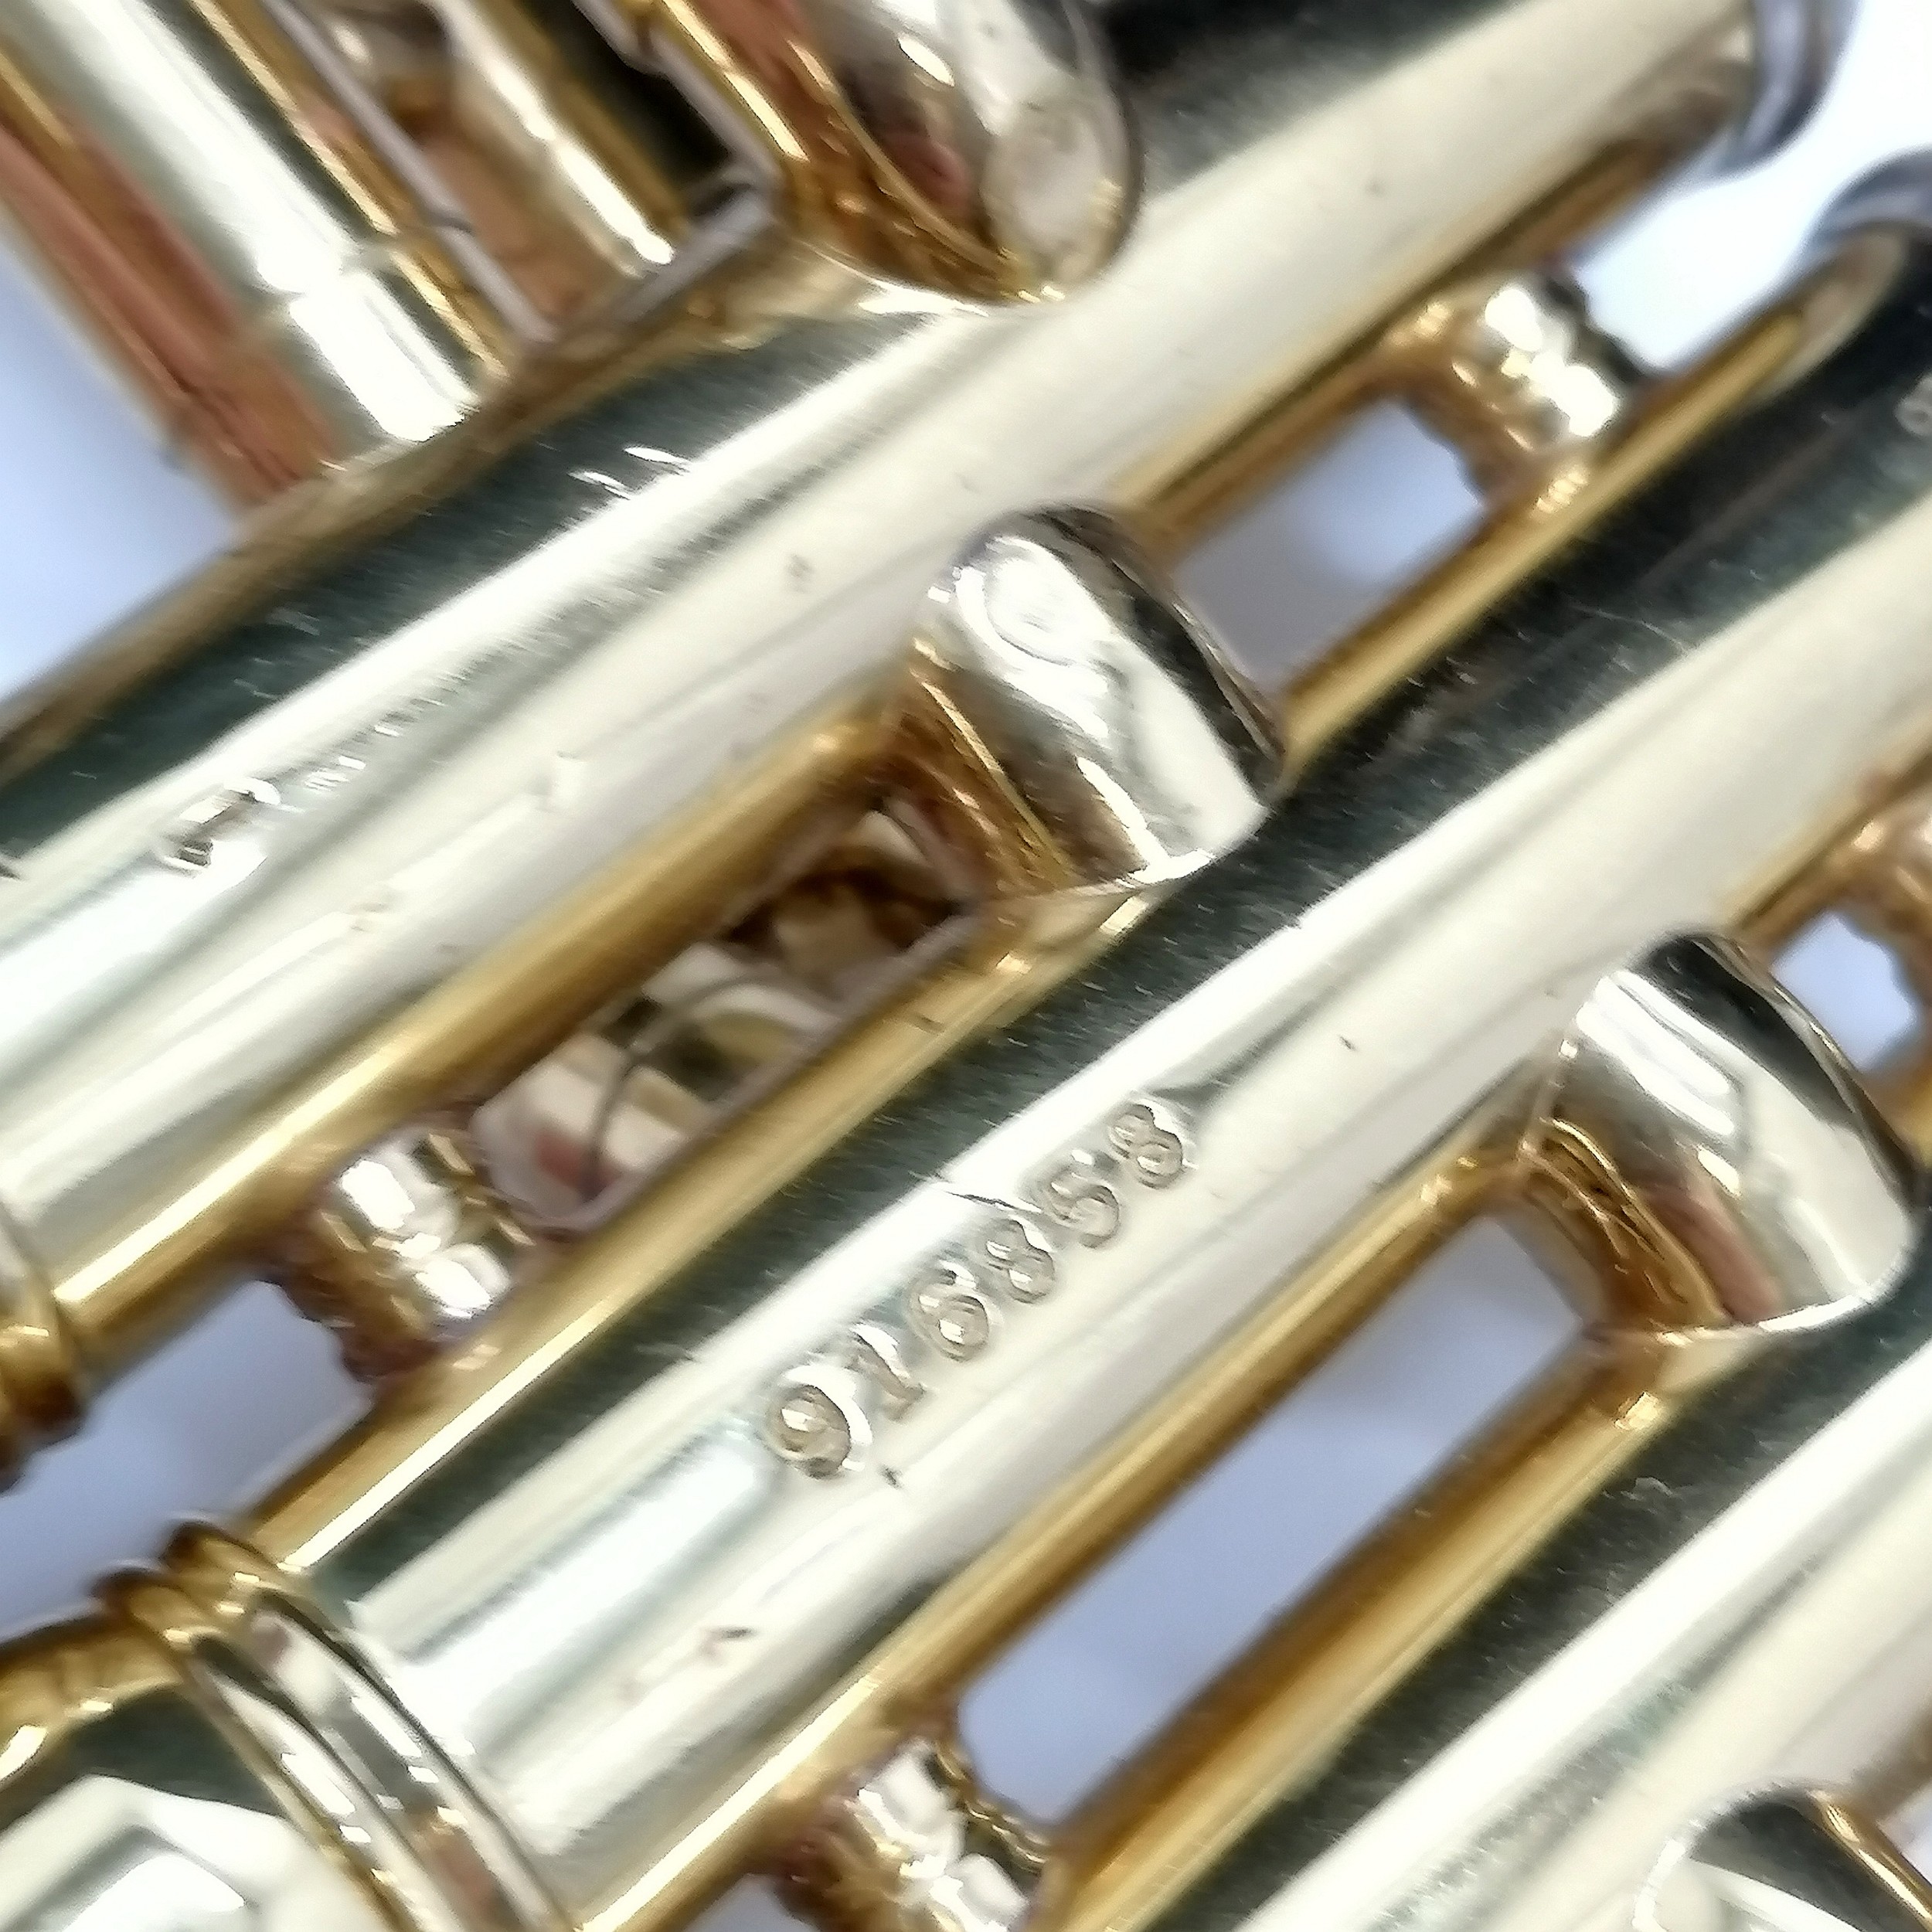 King 600 USA brass trumpet #458 with Holton & 7C mouthpieces in original carry case - Image 4 of 6